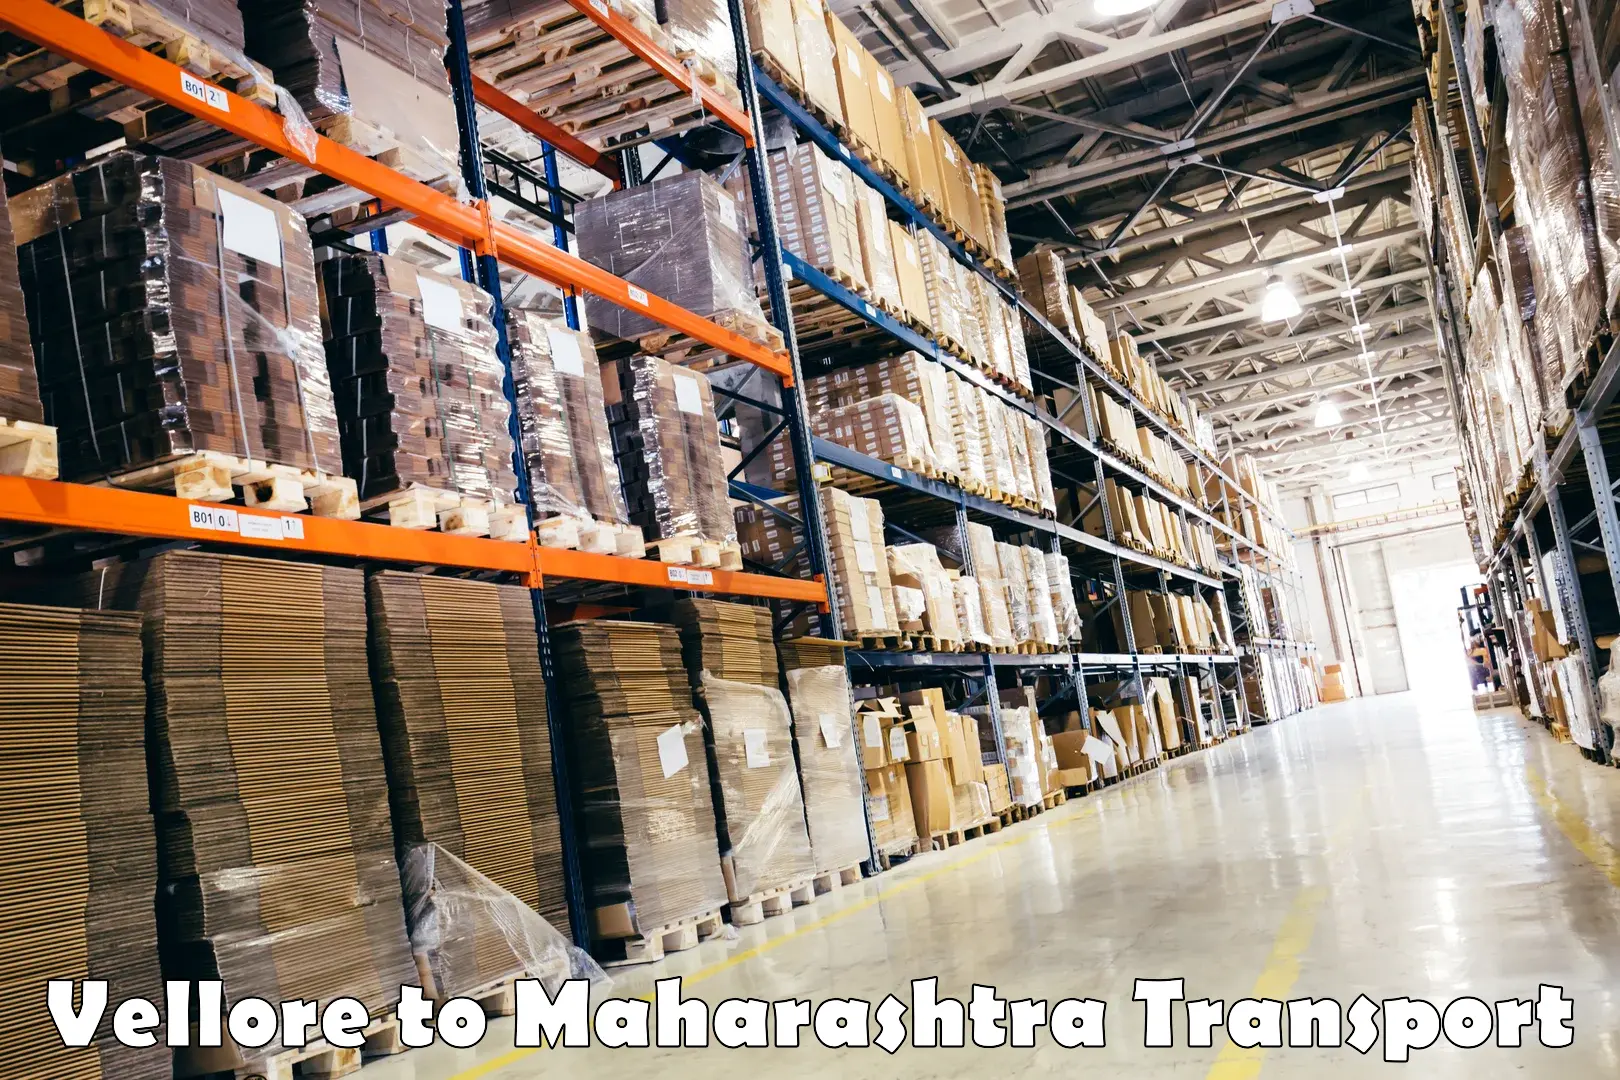 Truck transport companies in India Vellore to Lakhandur